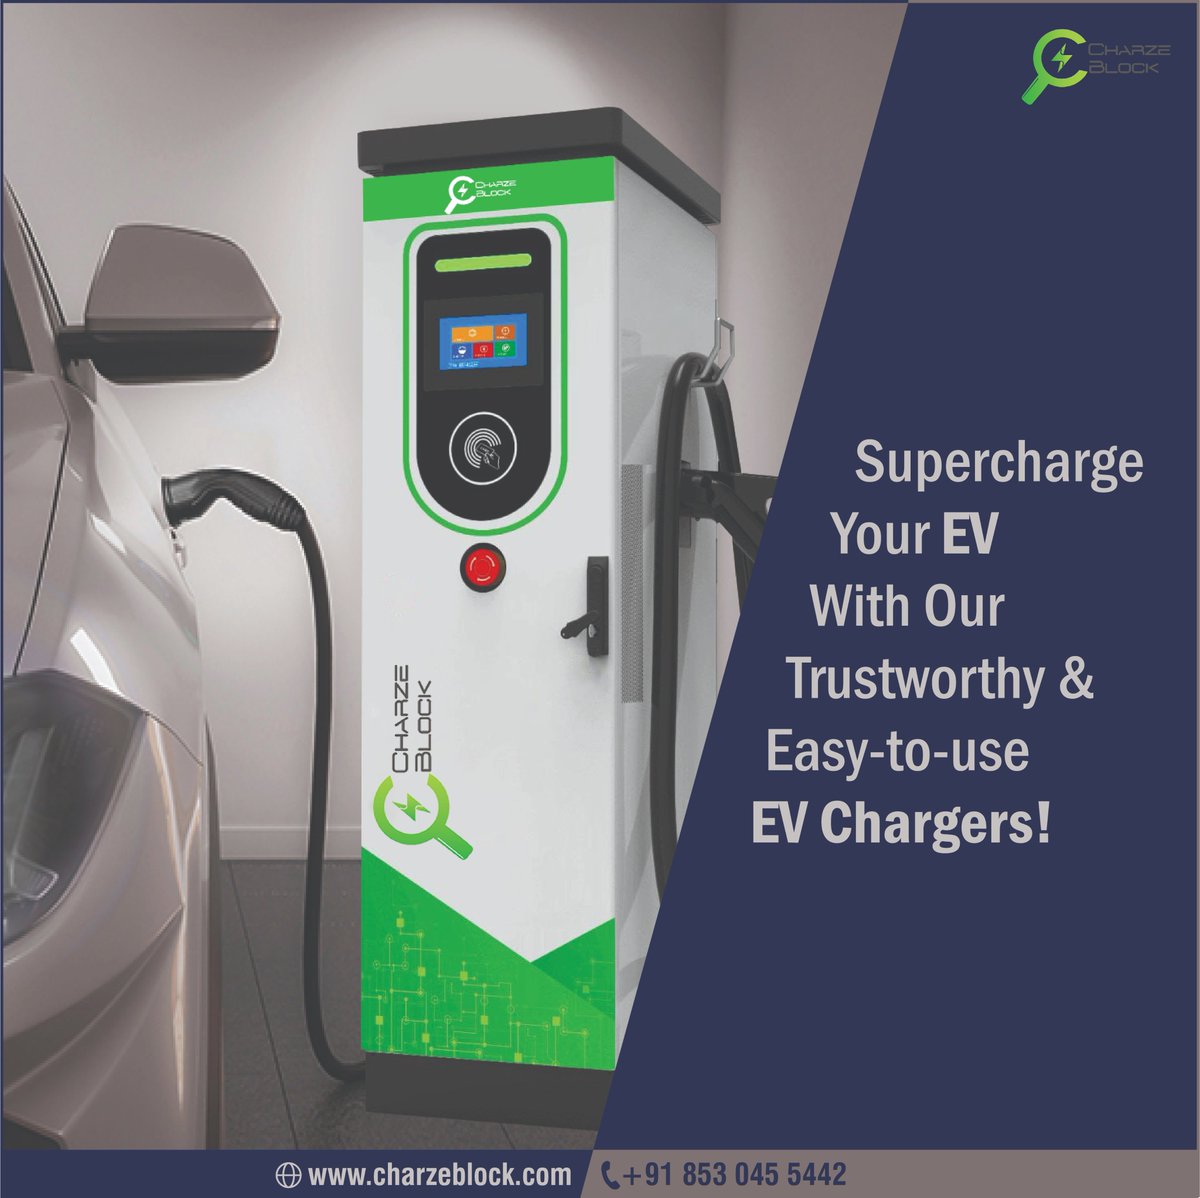 Charge your EV  with us ! #charzeblock 
#ev #electricvehical #charger #supercharged #evcharger #evcharging #evchargingstation #evchargingsolution #SmartCharging #goelectric #gogreen #EVowners #DCcharger #accharger #ConnectwithCharzeBlock #evstation #greenbusiness #cleanenergy